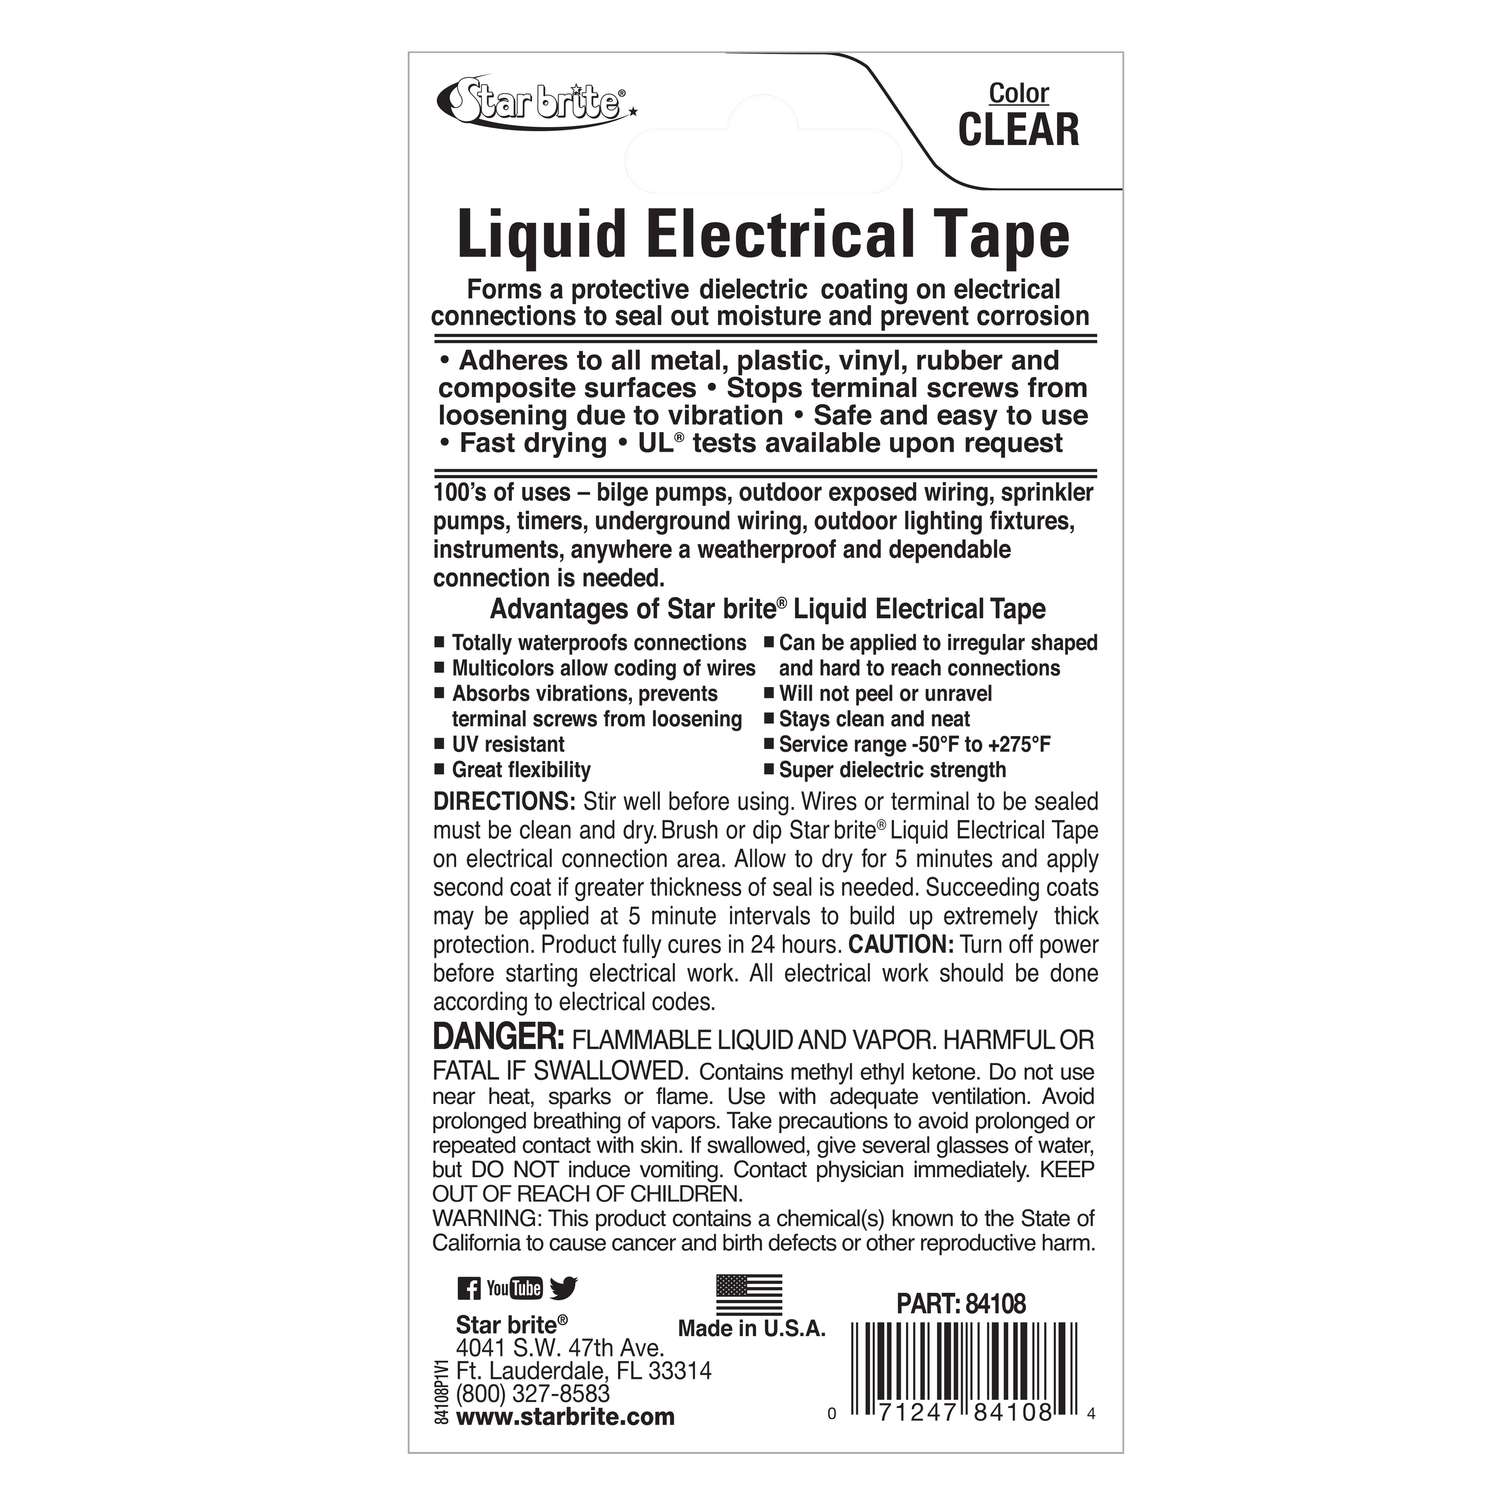 Liquid Electrical Tape Red 4oz, Liquid Electrical Tape Red 4oz